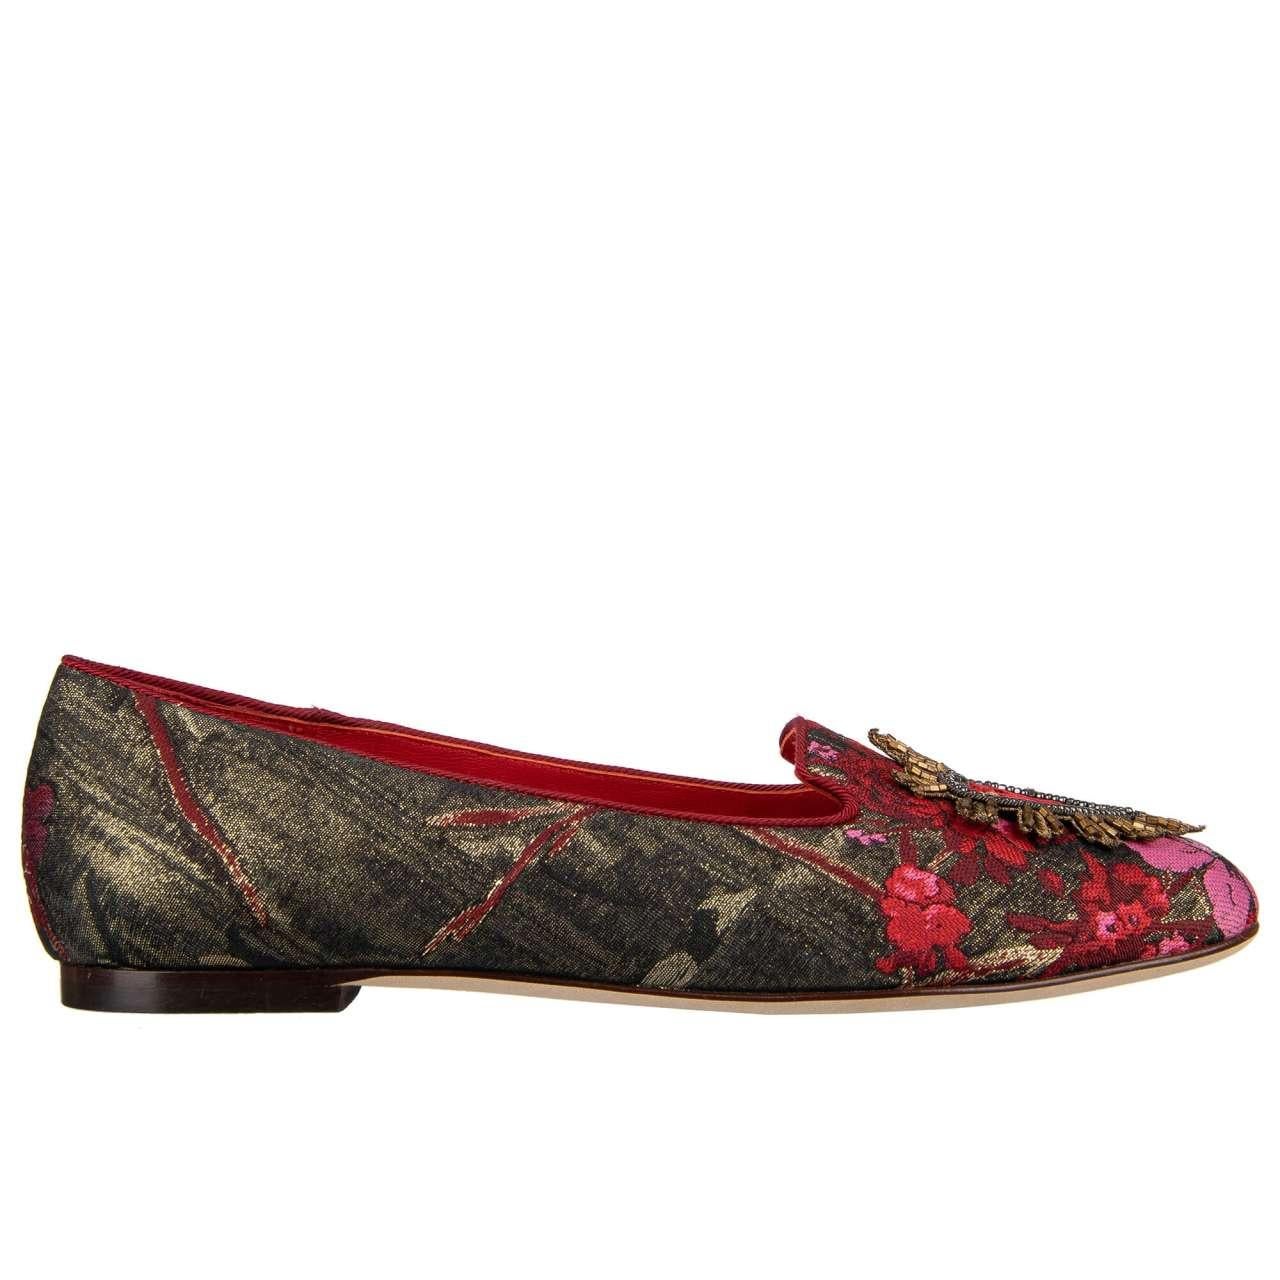 - Pointed Lurex Jacquard Ballet Flats AUDREY in gold-red with Sacred Heart and Logo embroidery by DOLCE & GABBANA - New with Box - MADE IN ITALY - Former RRP: EUR 649 - Embroidered Sacred Heart and Logo - Model: CP0051-B9L36-HGM62 - Material: Lurex,